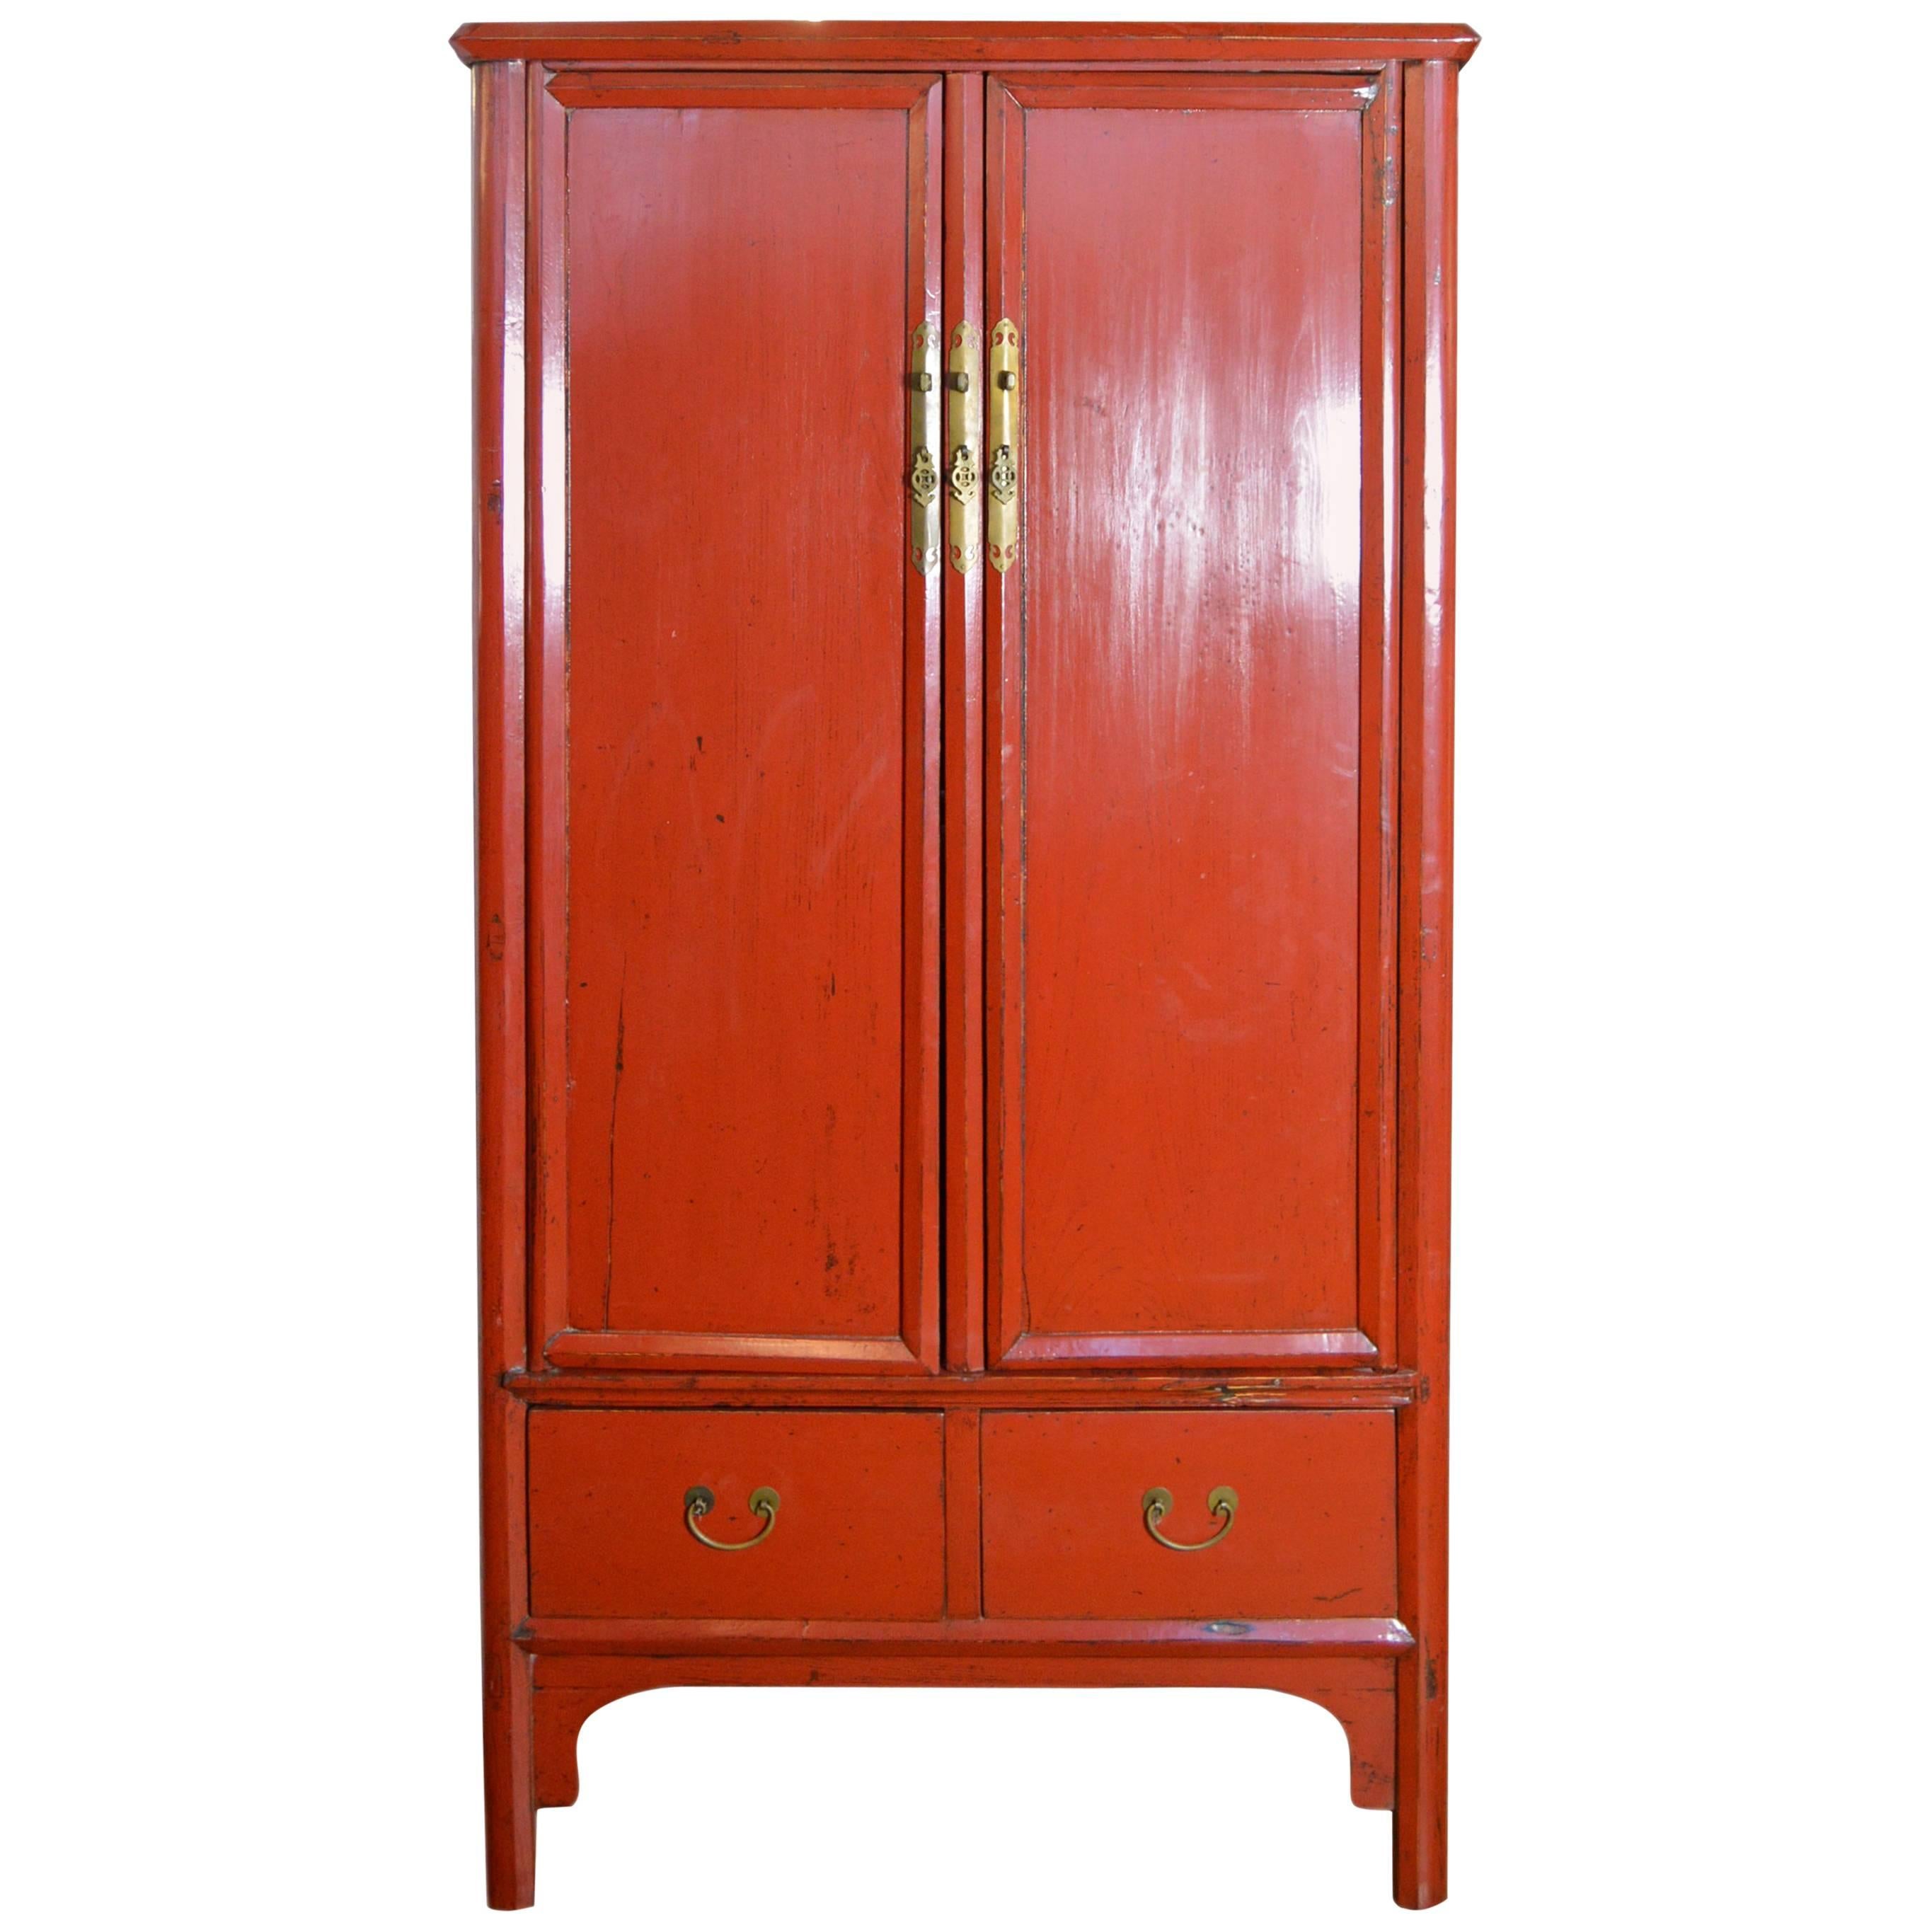 Antique Chinese Red Lacquered Armoire with Doors, Drawers and Brass Hardware